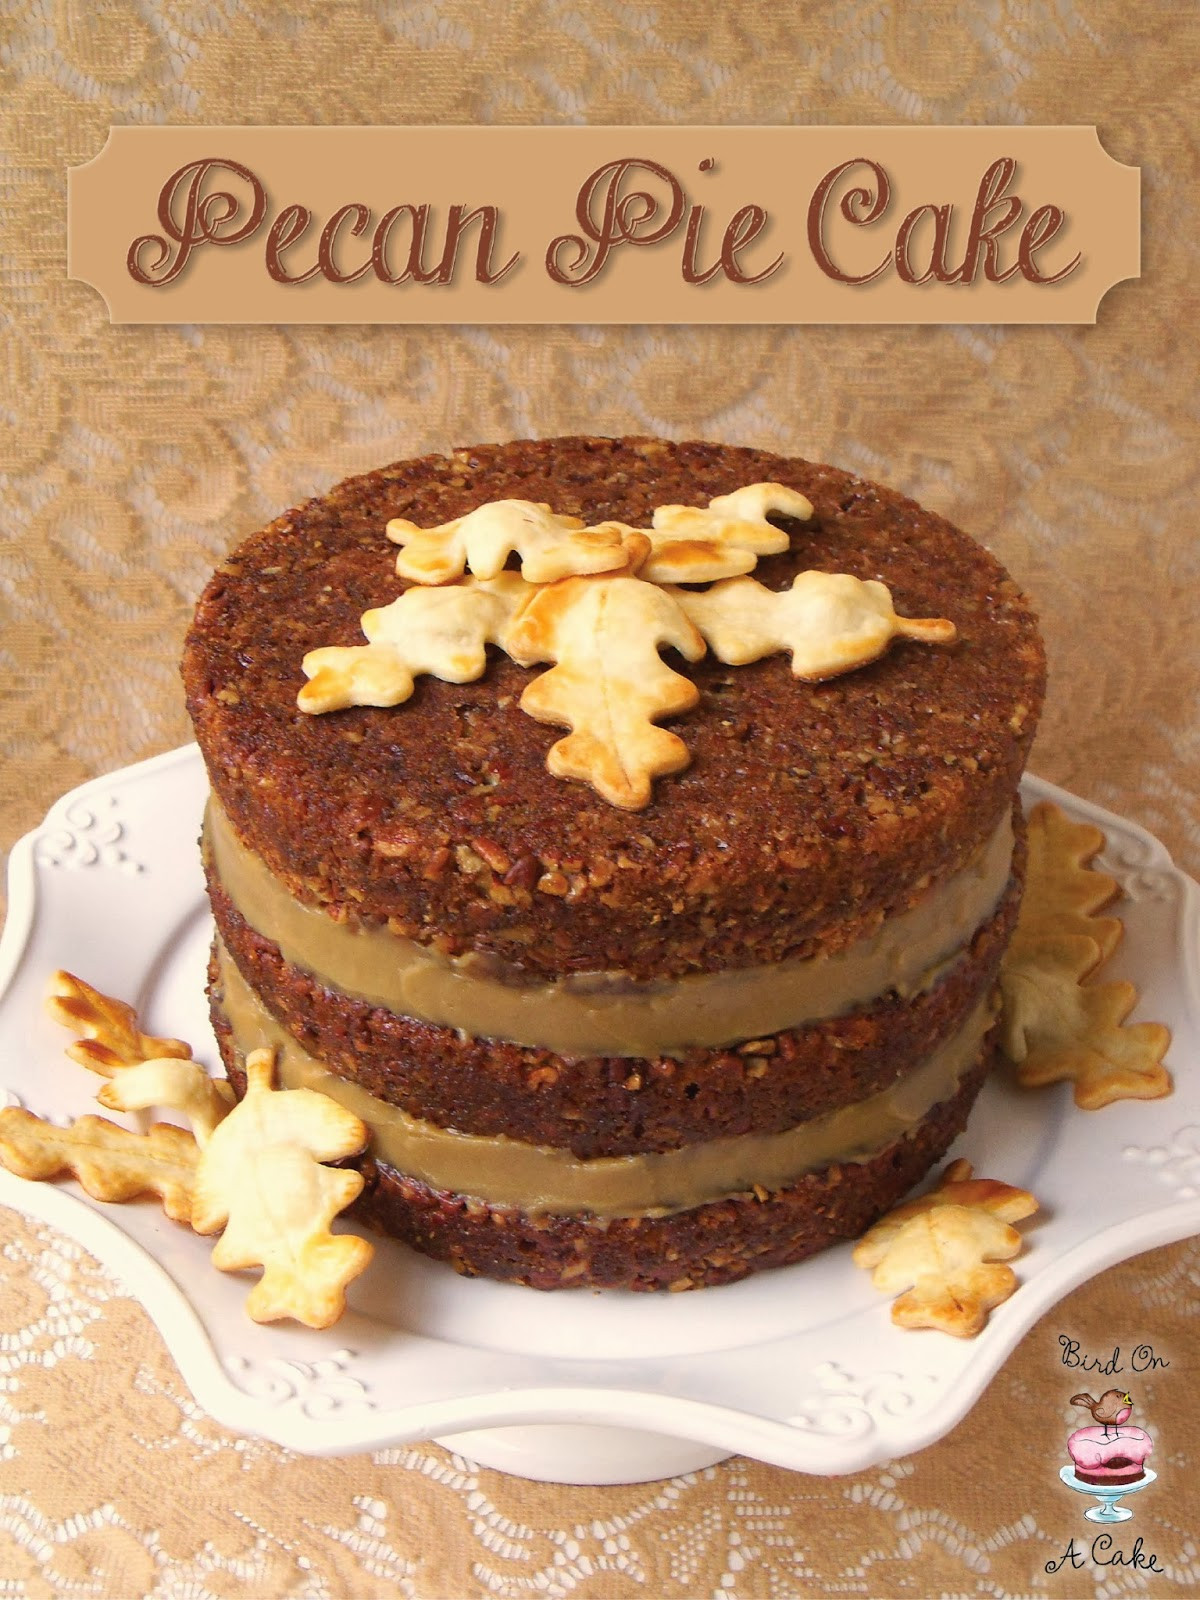 Thanksgiving Pies And Cakes
 25 Thanksgiving Recipes Desserts and Treats The 36th